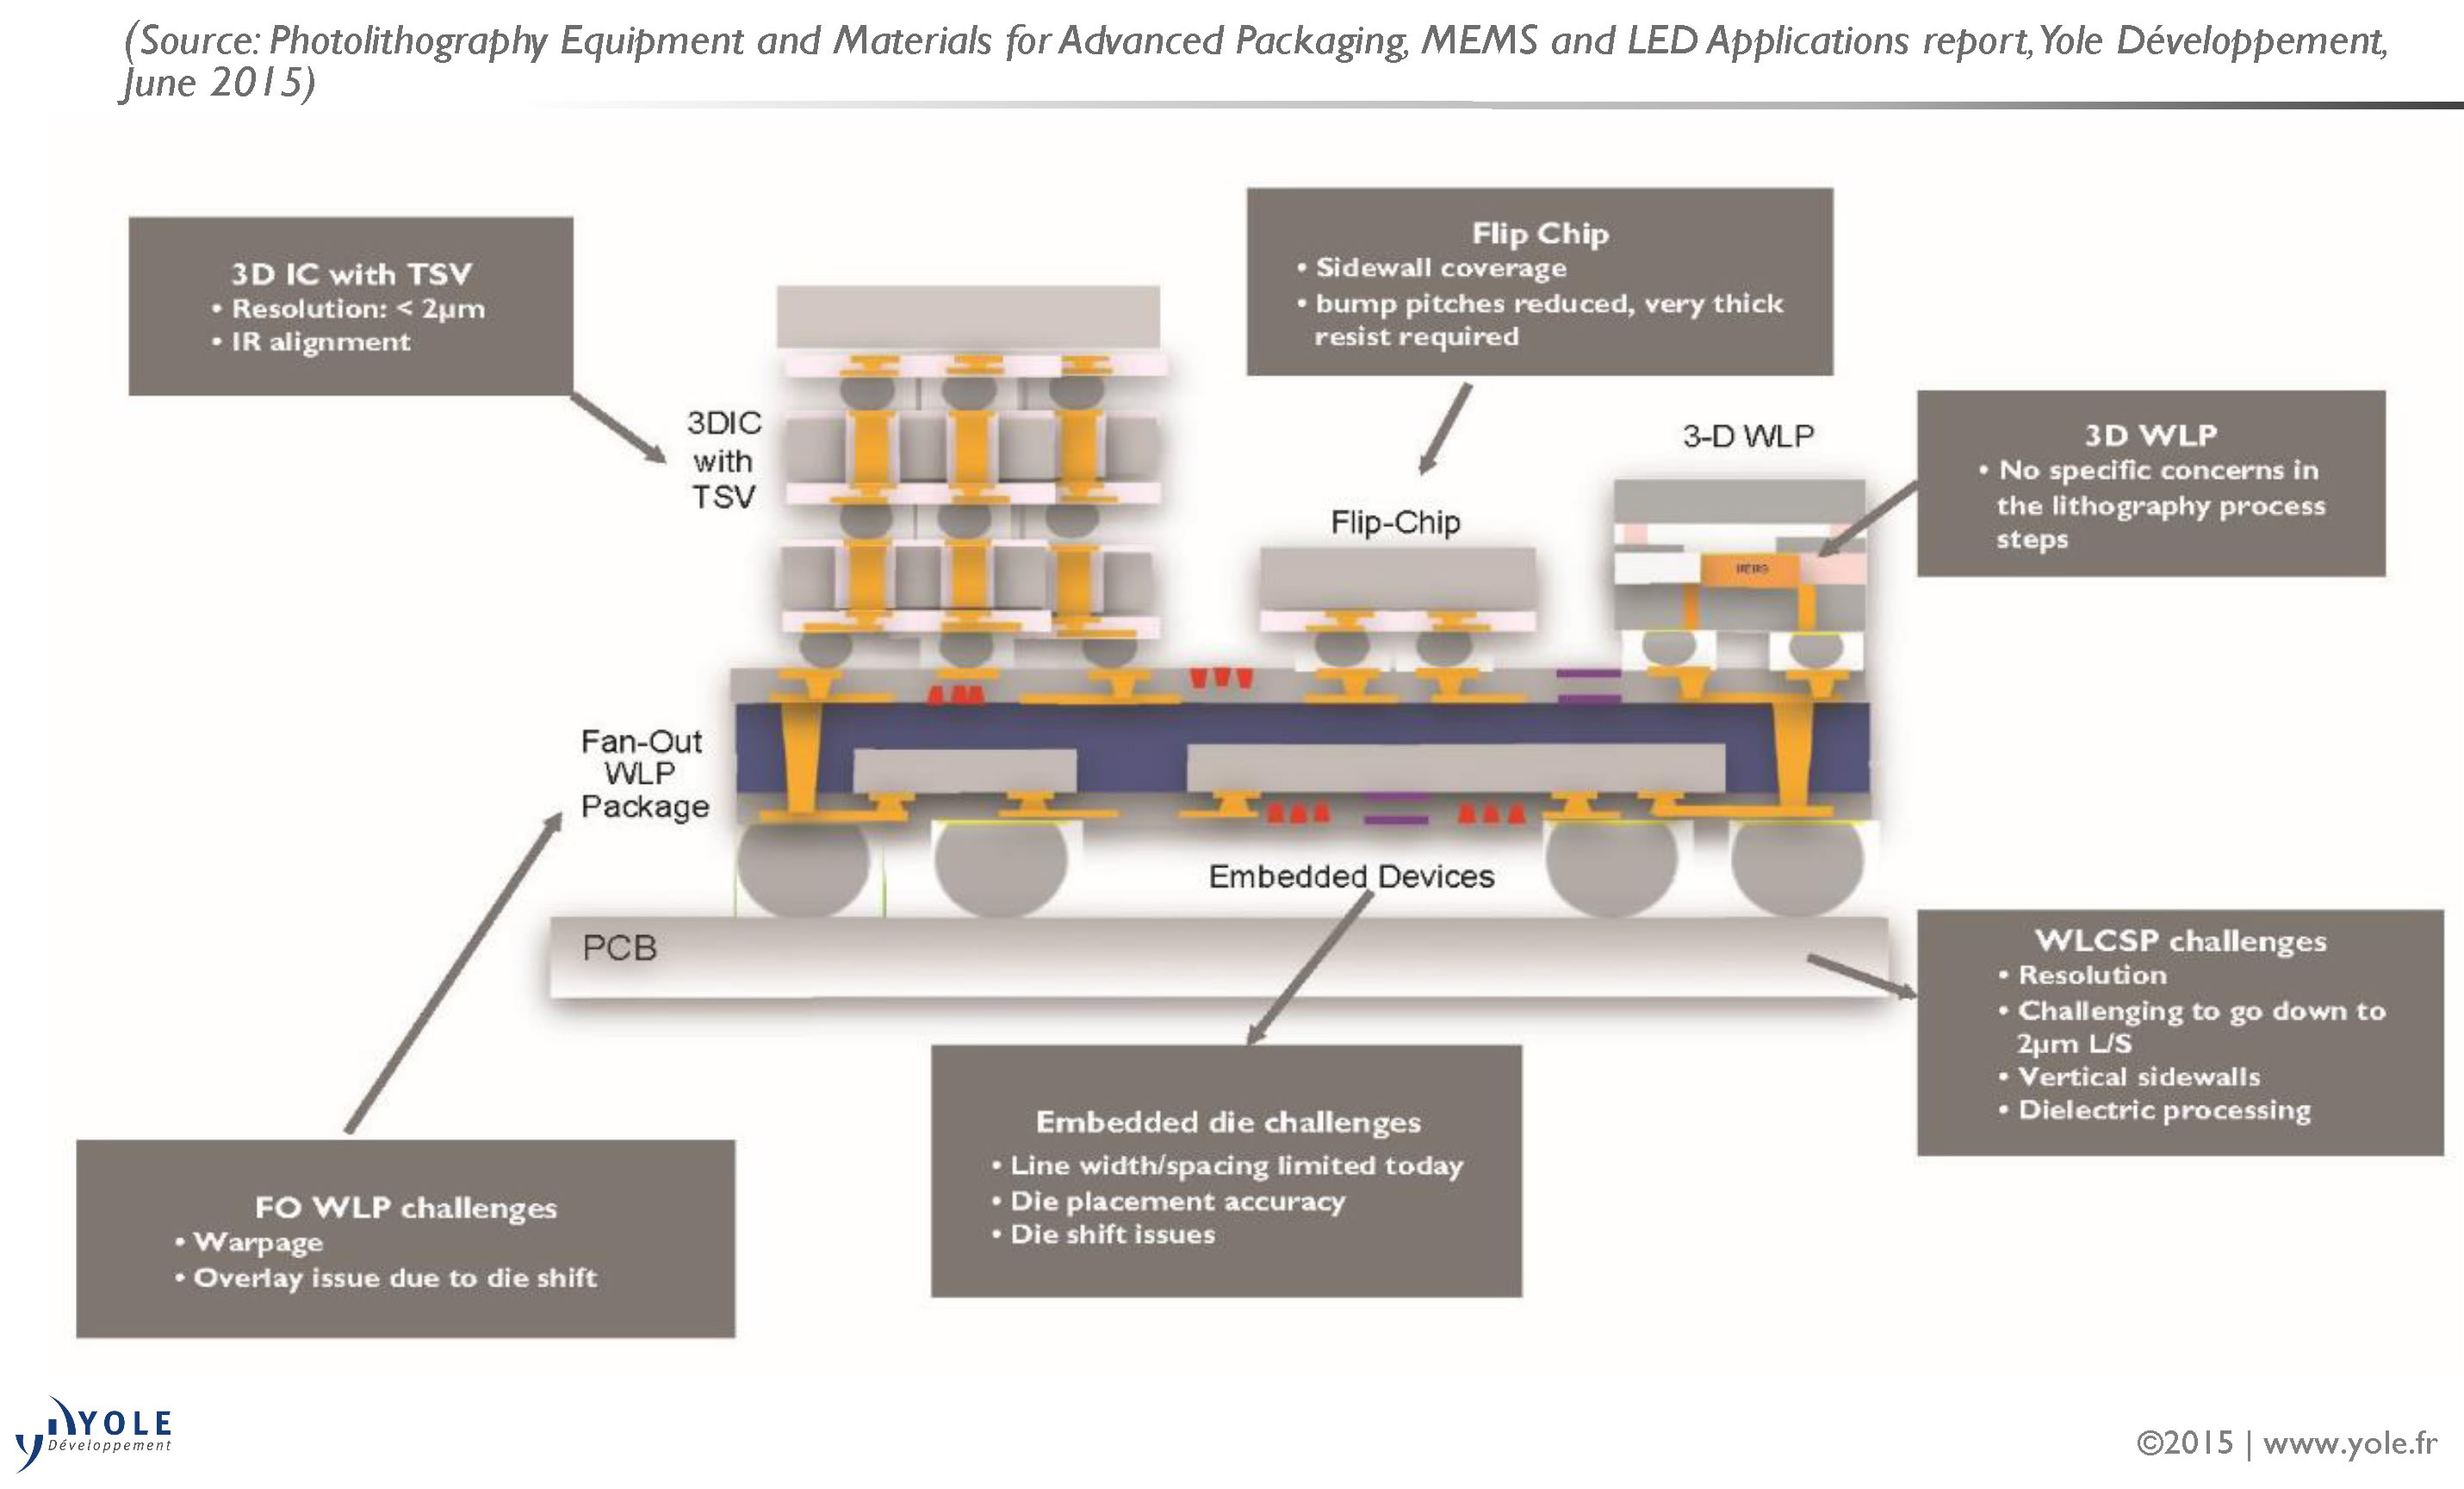 Key lithography challenges for advanced packaging